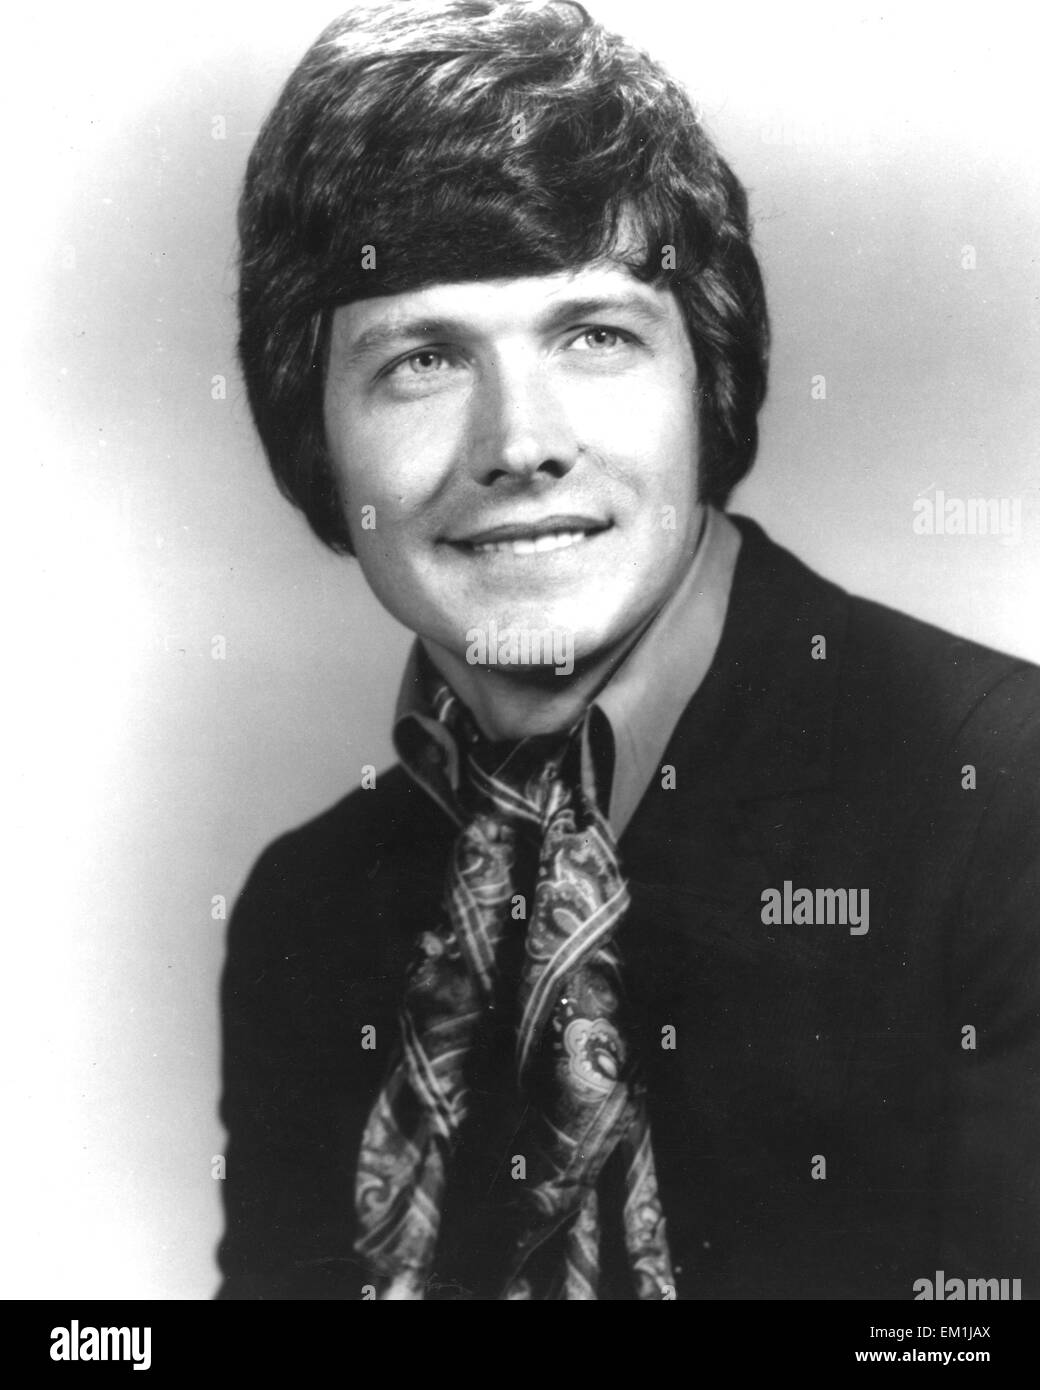 BILLY JOE ROYAL Promotional photo of US singer about 1965 Stock Photo